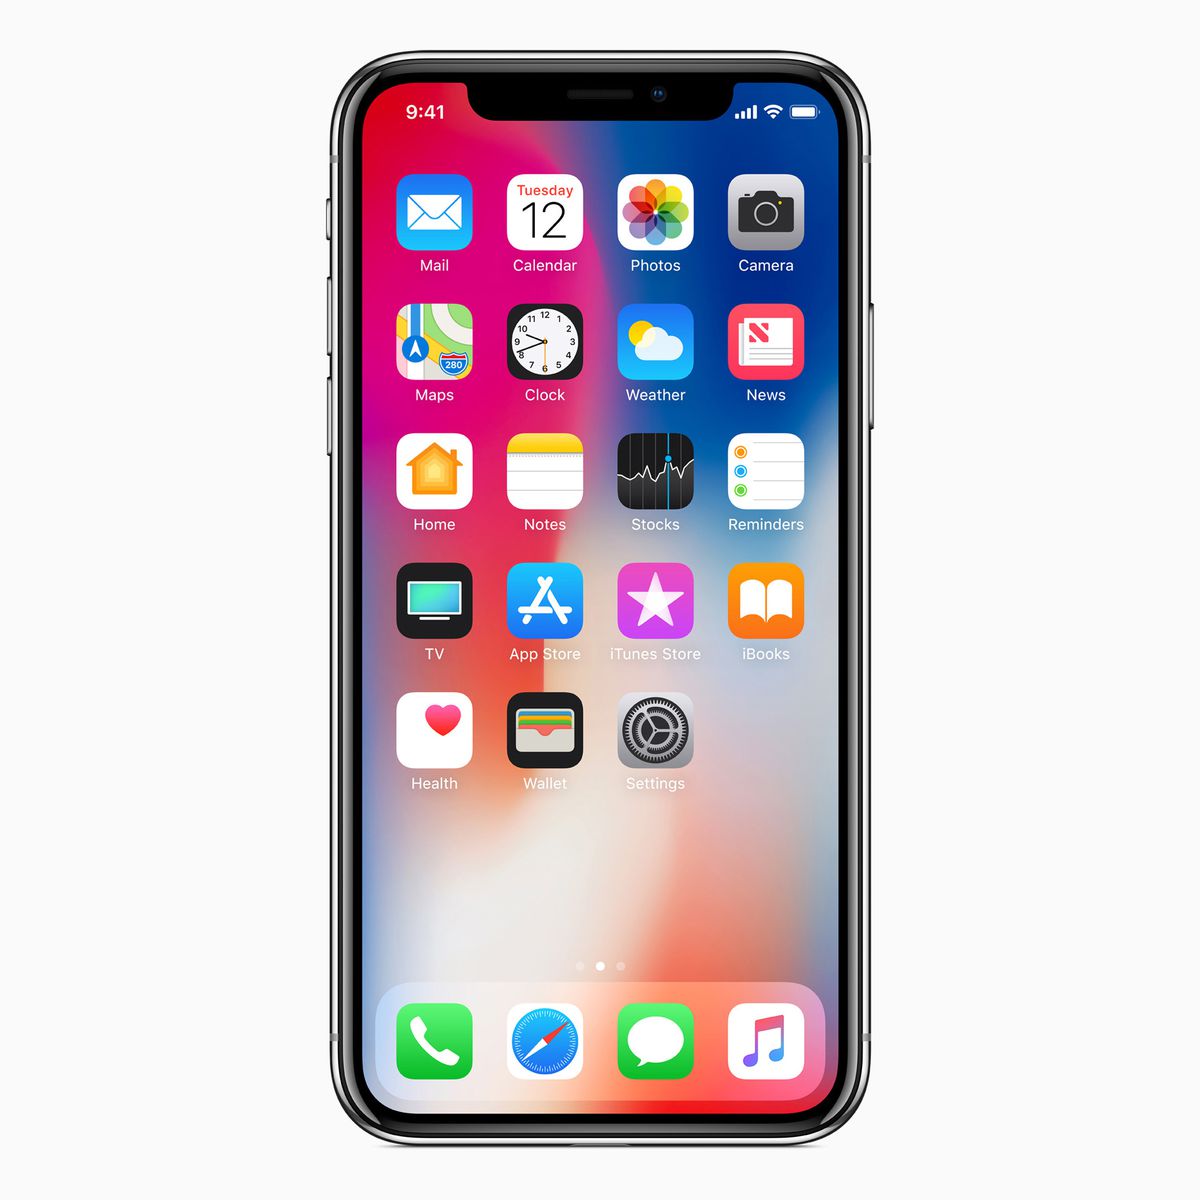 iPhone X - Embed